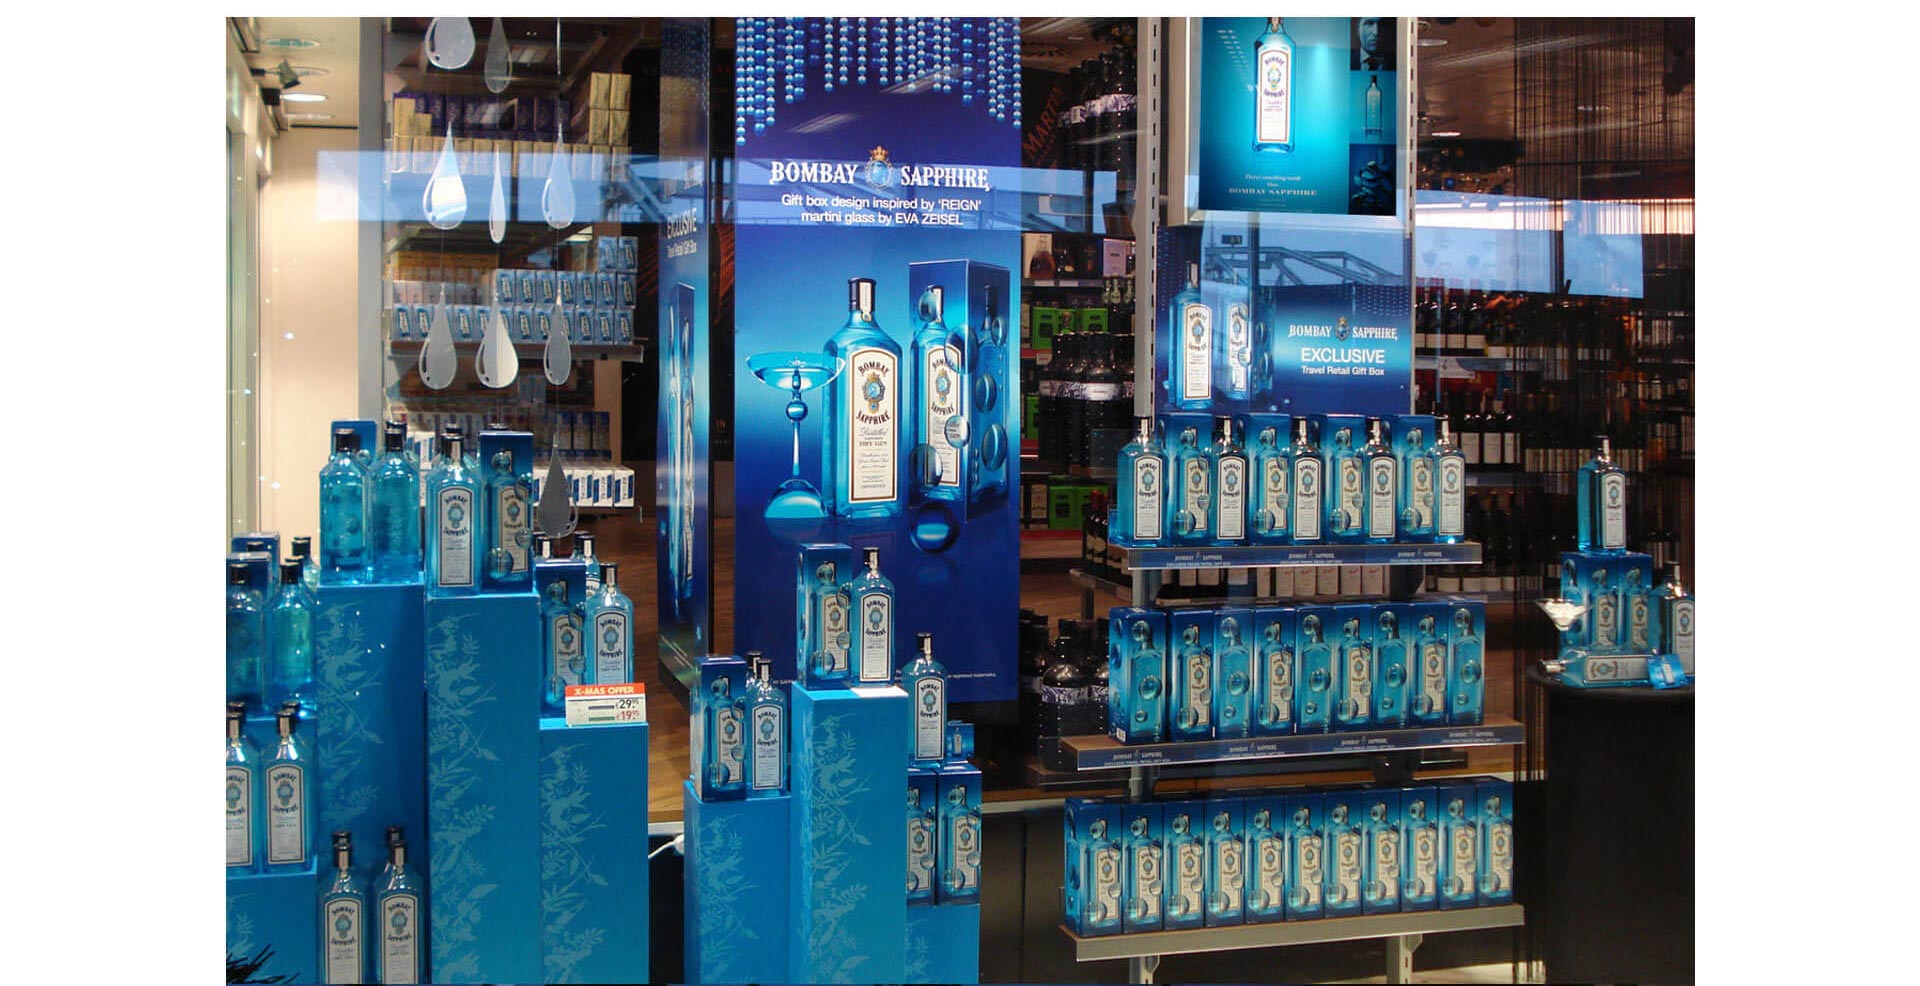  Bombay Sapphire Reign window display branding and promotion campaigns travel retail in airports